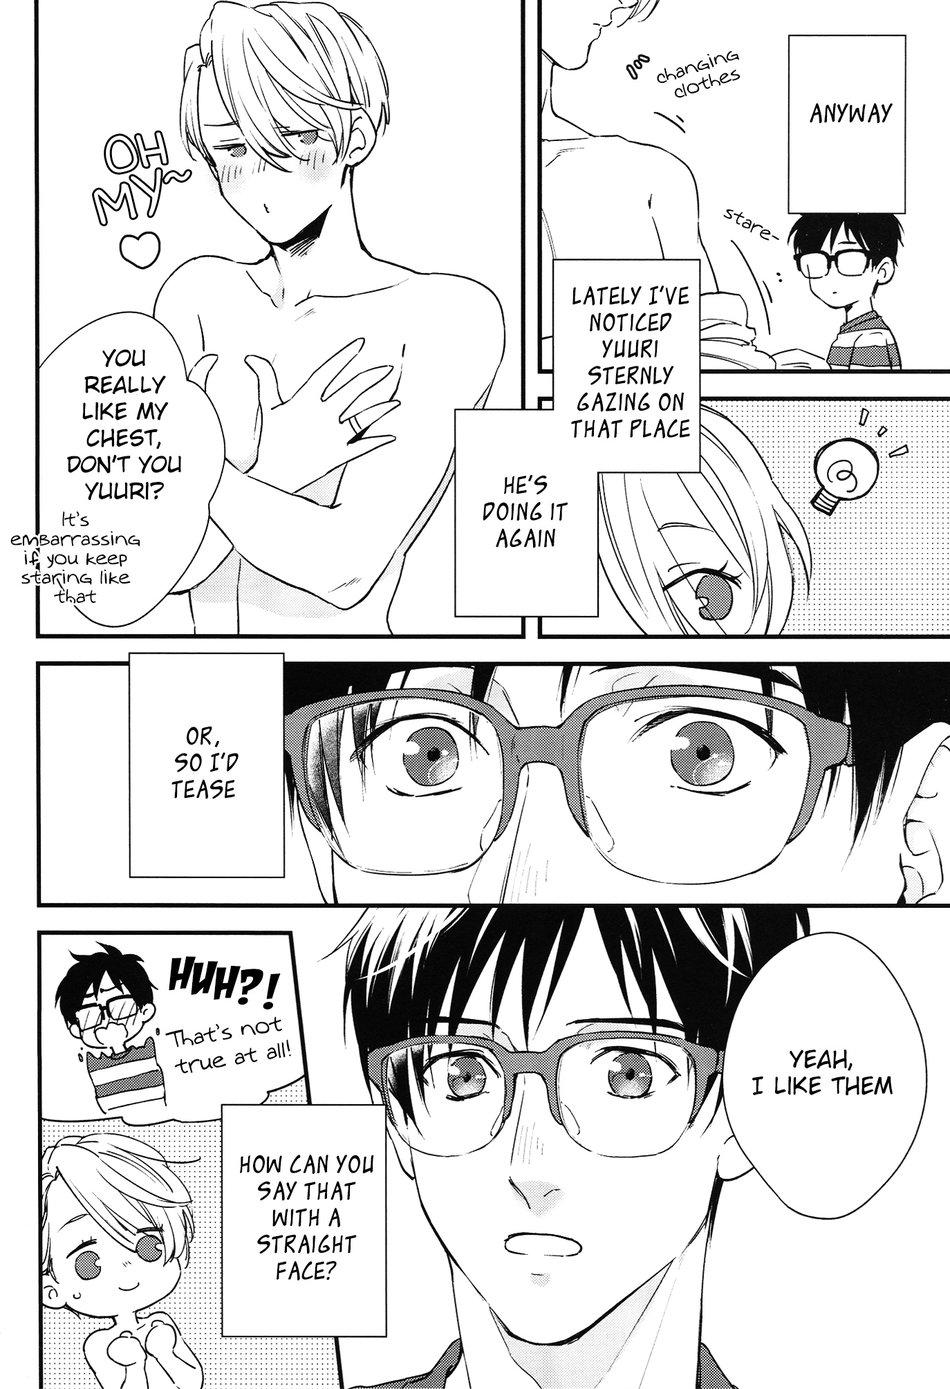 Shy Love Me, Touch Me - Yuri on ice Daring - Page 8